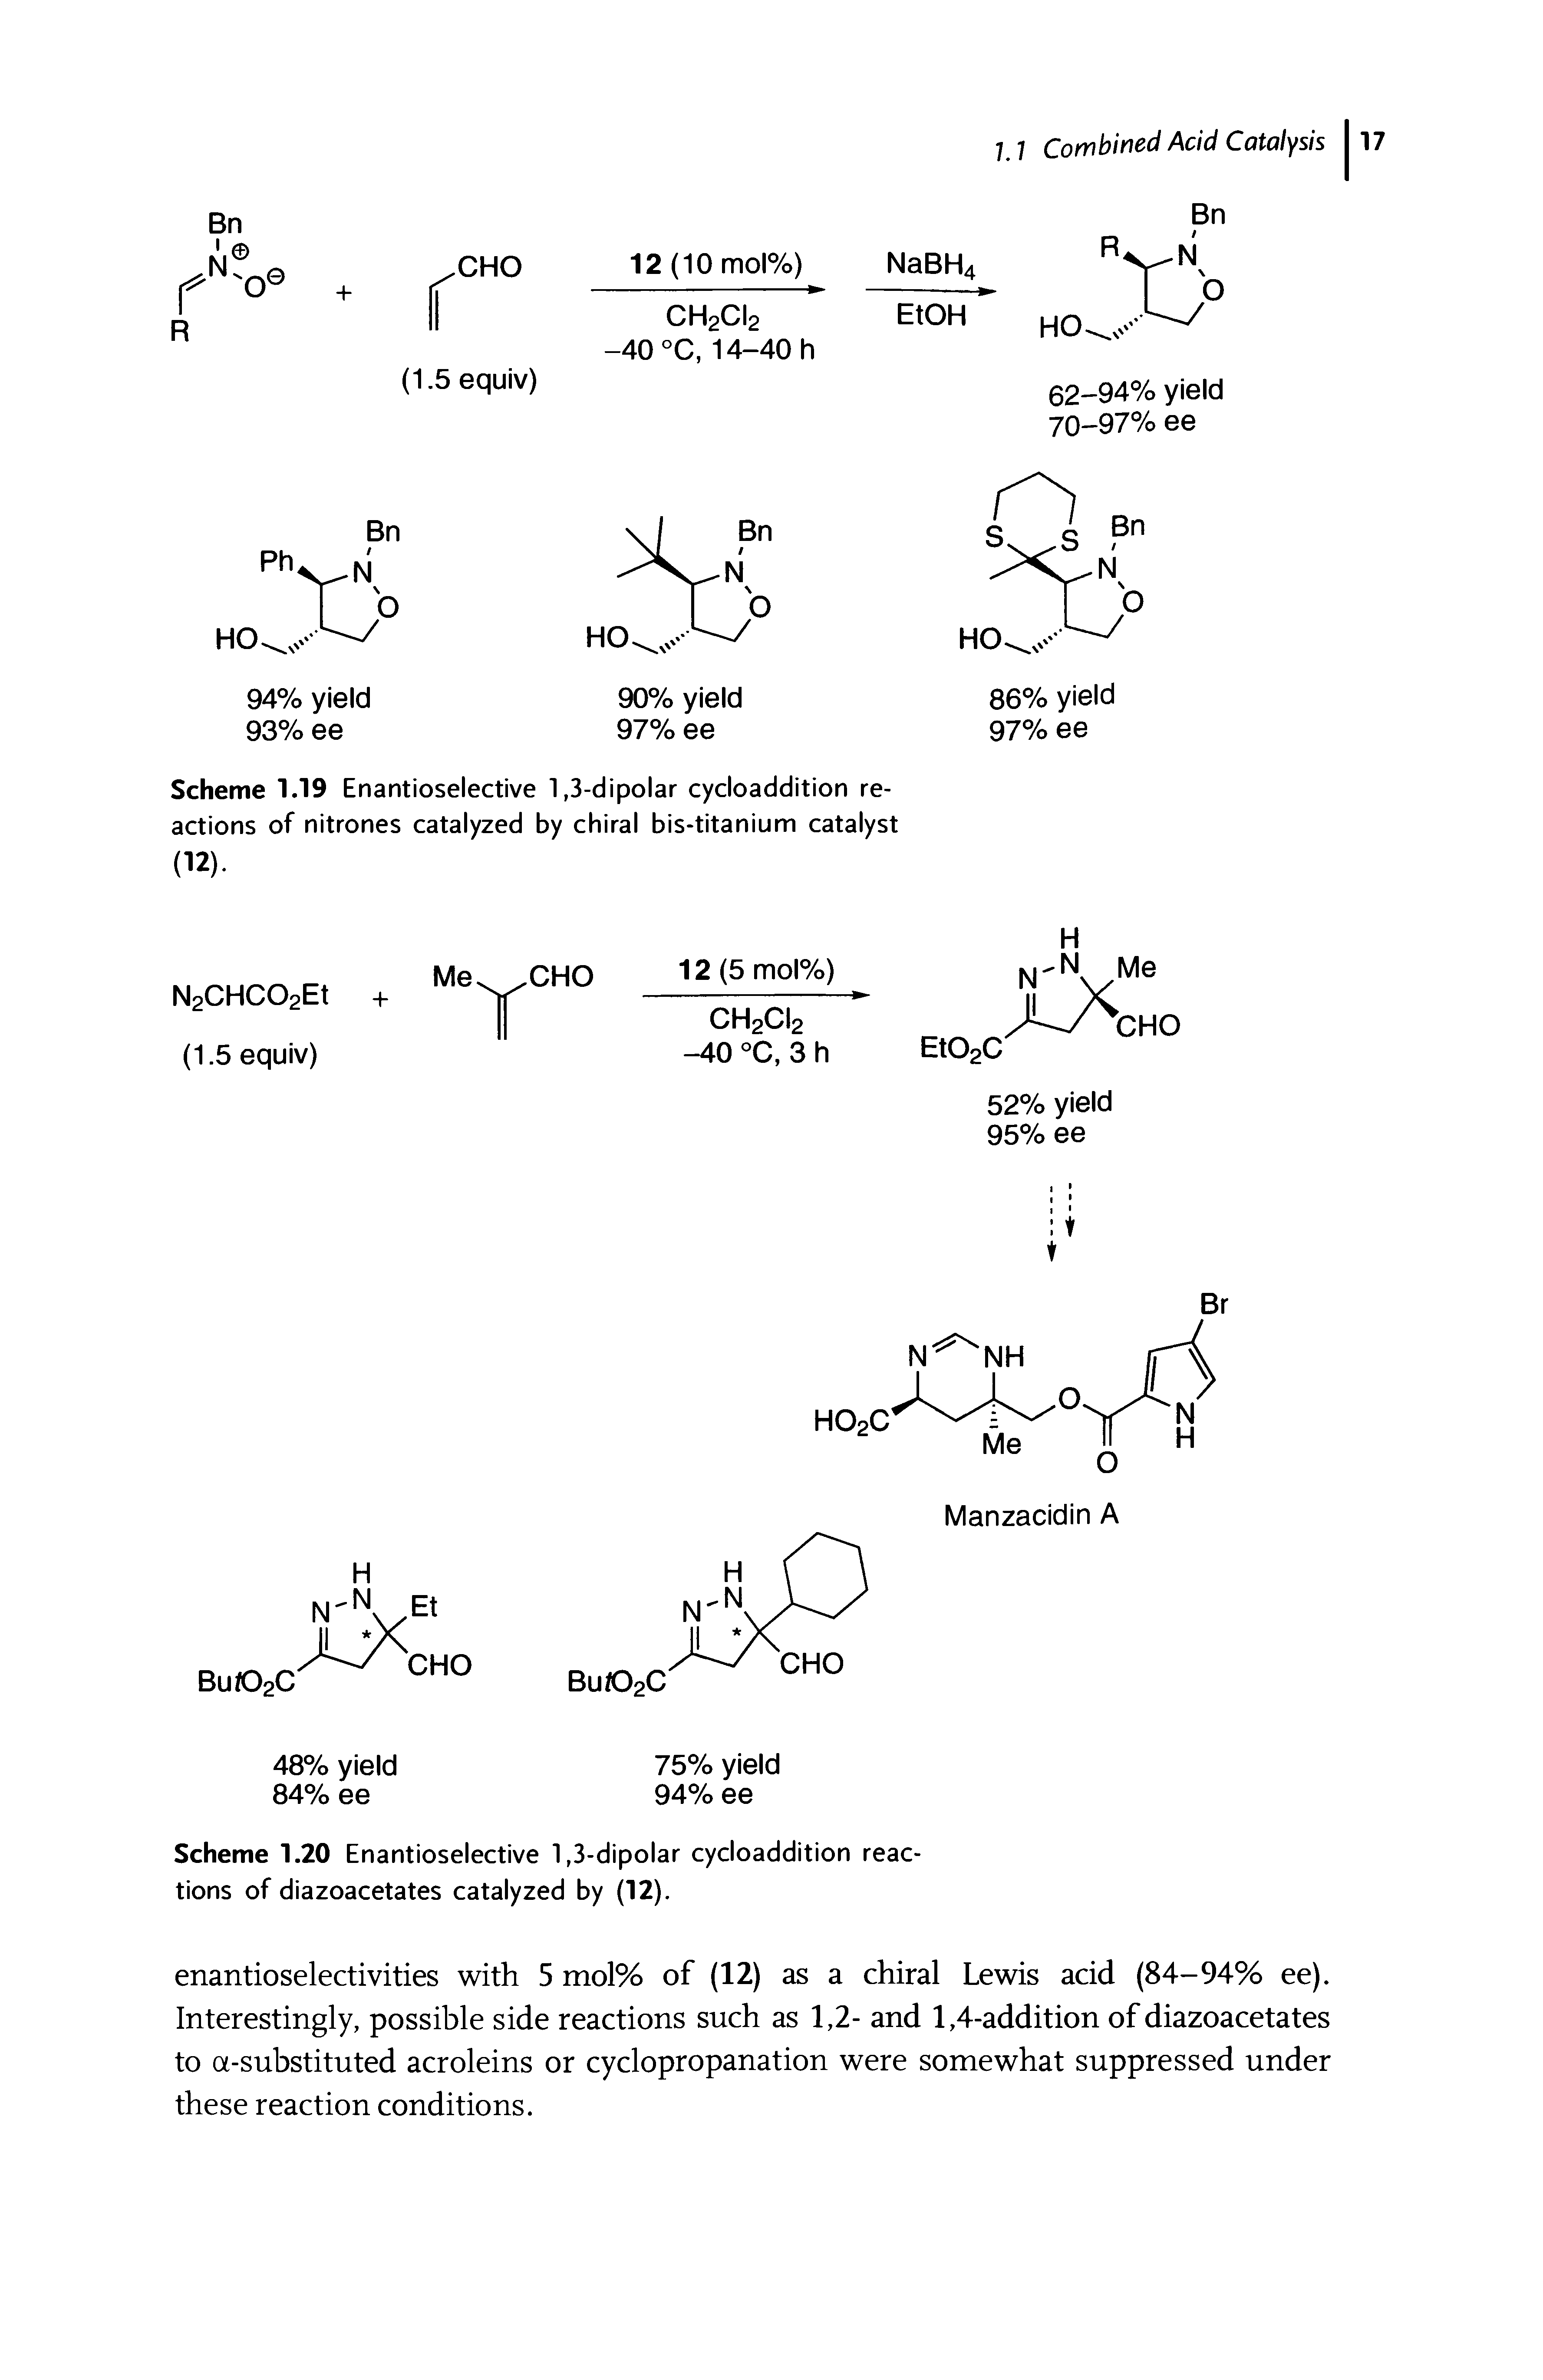 Scheme 1.19 Enantioselective 1,3-dipolar cycloaddition reactions of nitrones catalyzed by chiral bis-titanium catalyst (12).